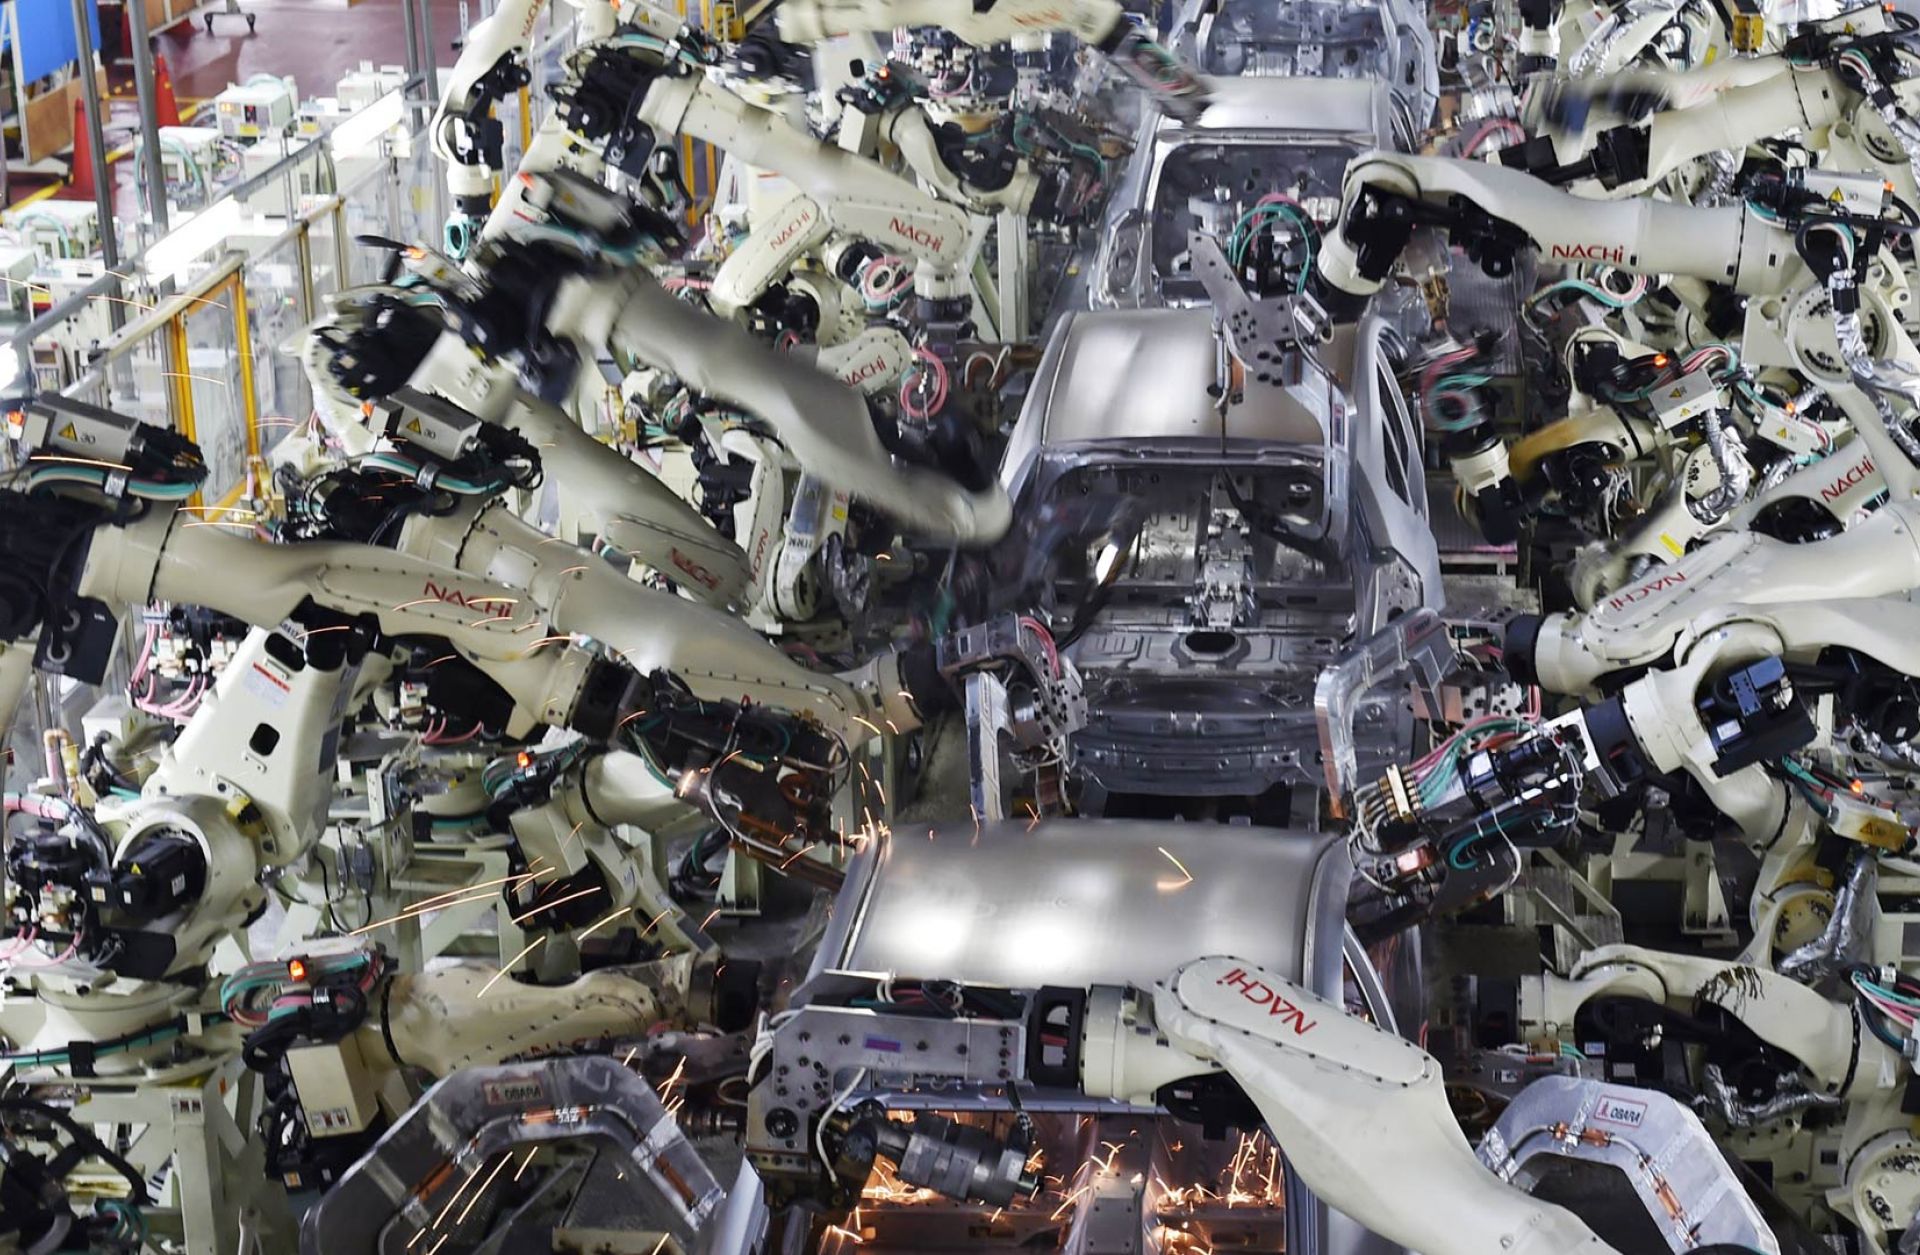 Automated welding machine robots assemble automobile bodies at Toyota Motor's Tsutsumi plant in Toyota, Japan.